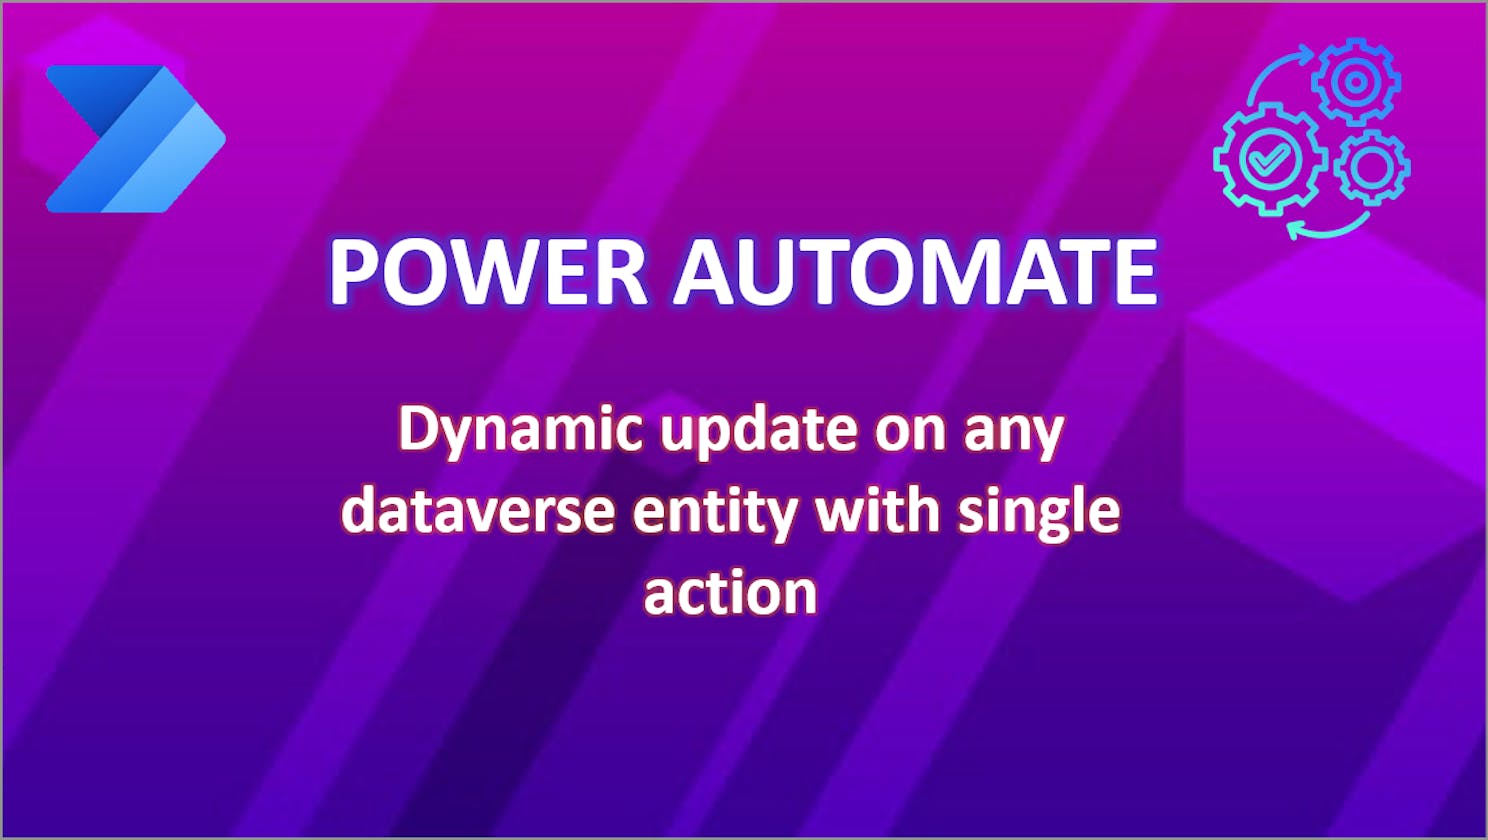 Power Automate: Dynamic update on any dataverse entity with single action